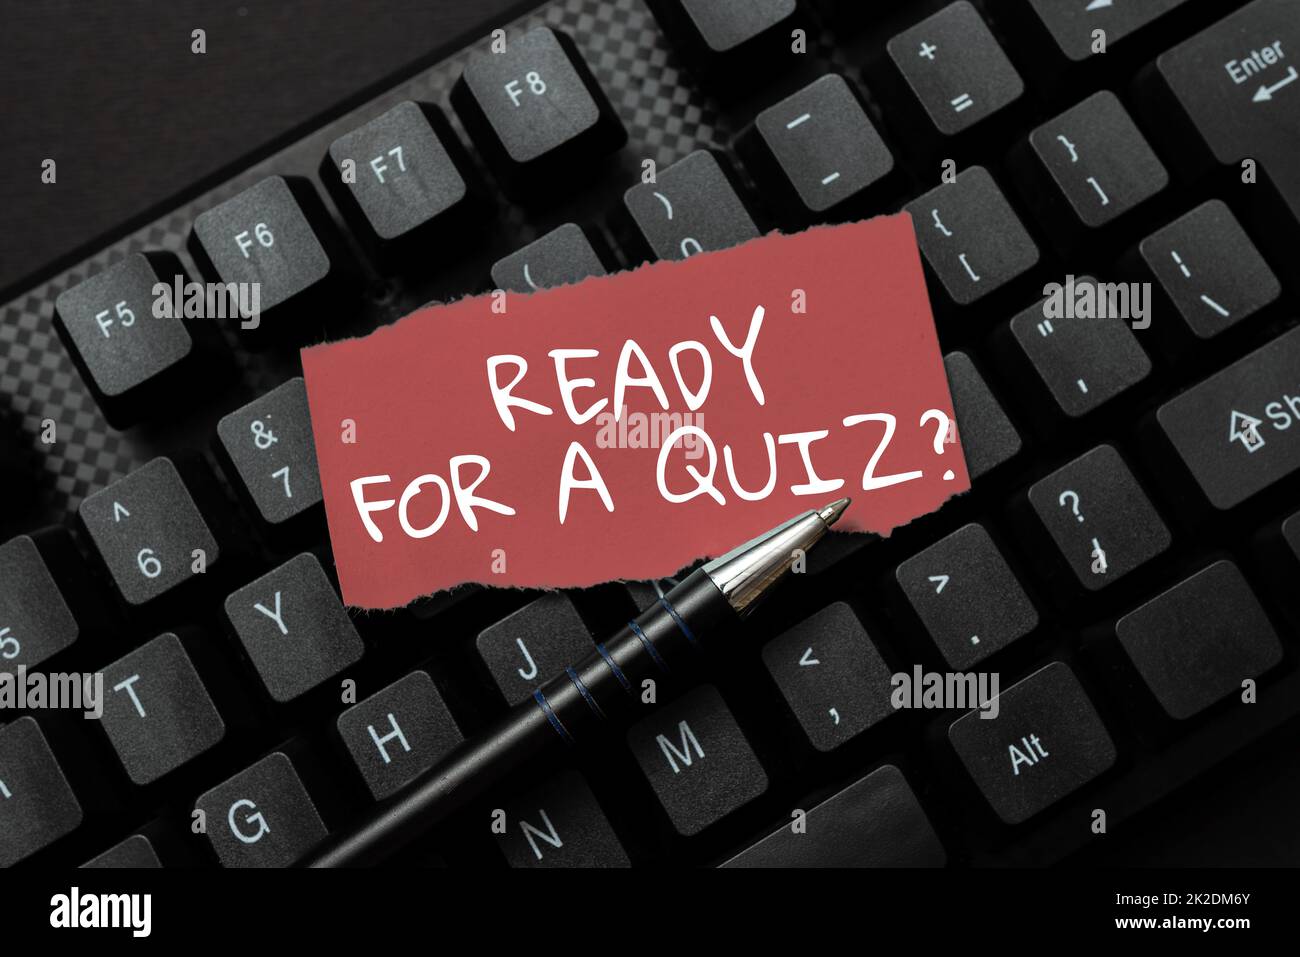 Text sign showing Ready For A Quiz Question. Business showcase Taking educational assessment Preparing an exam Typing Image Descriptions And Keywords, Entering New Internet Website Stock Photo